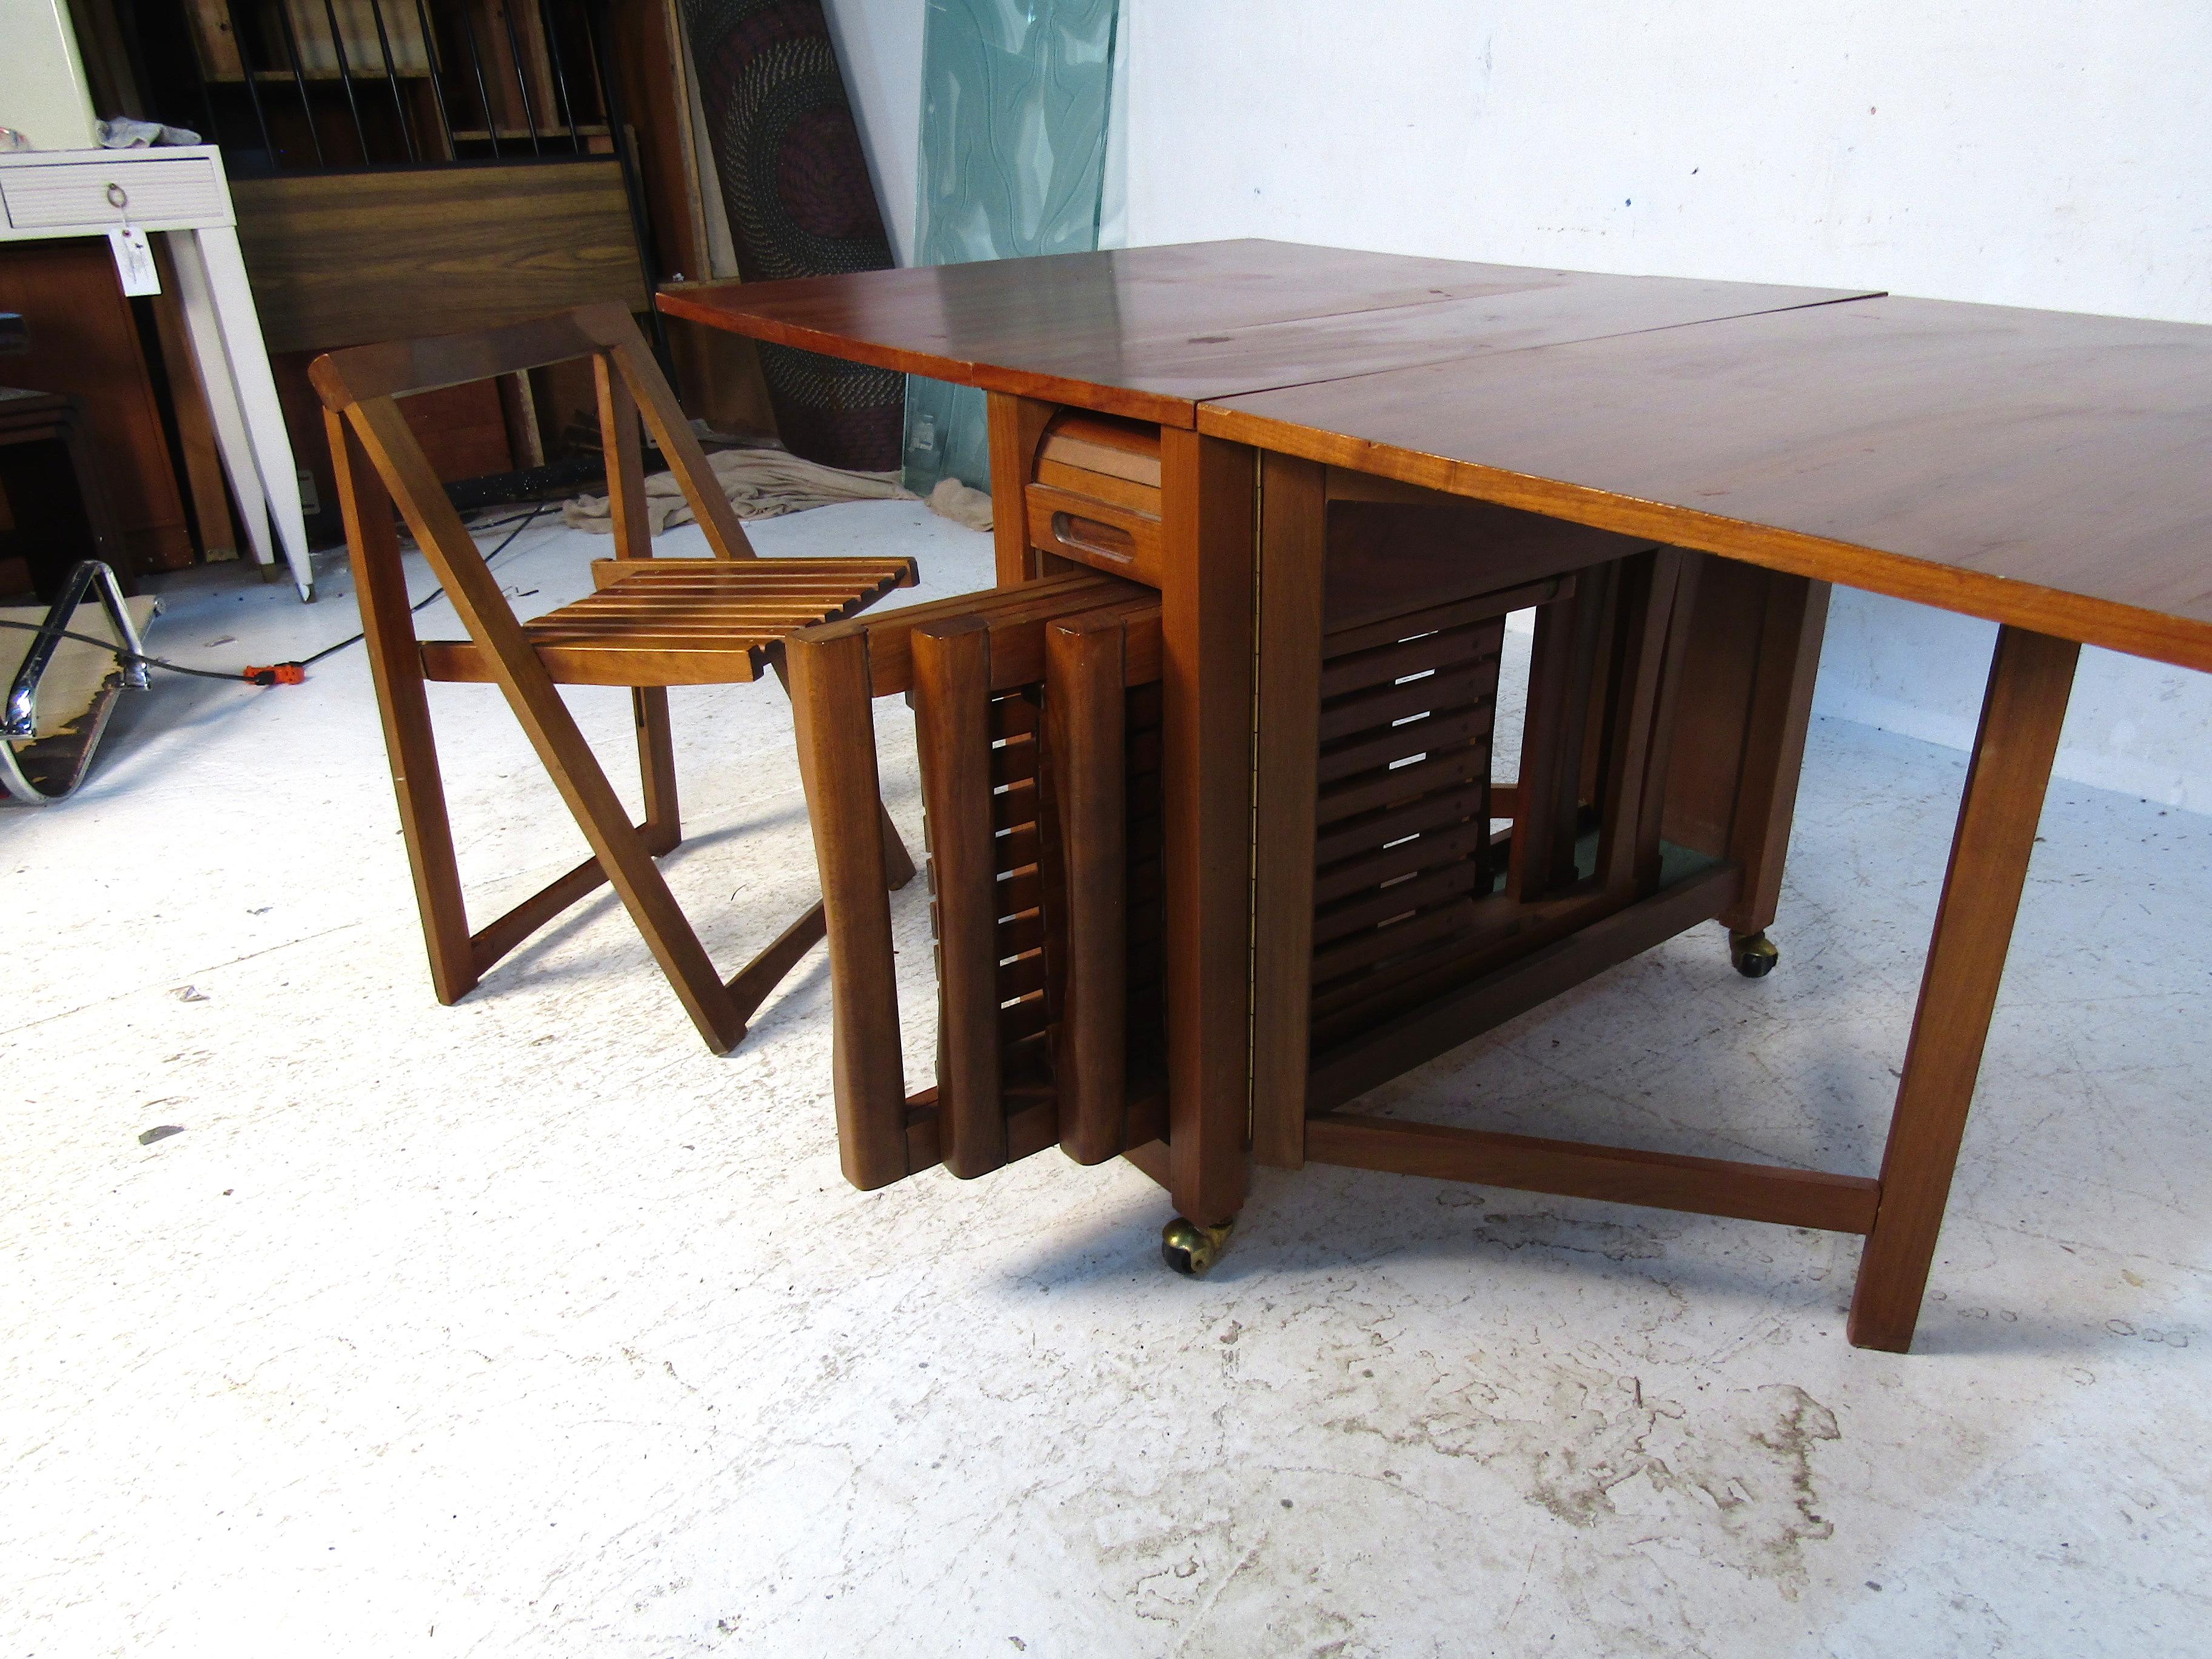 20th Century Midcentury Drop-Leaf Table with Storable Matching Chairs